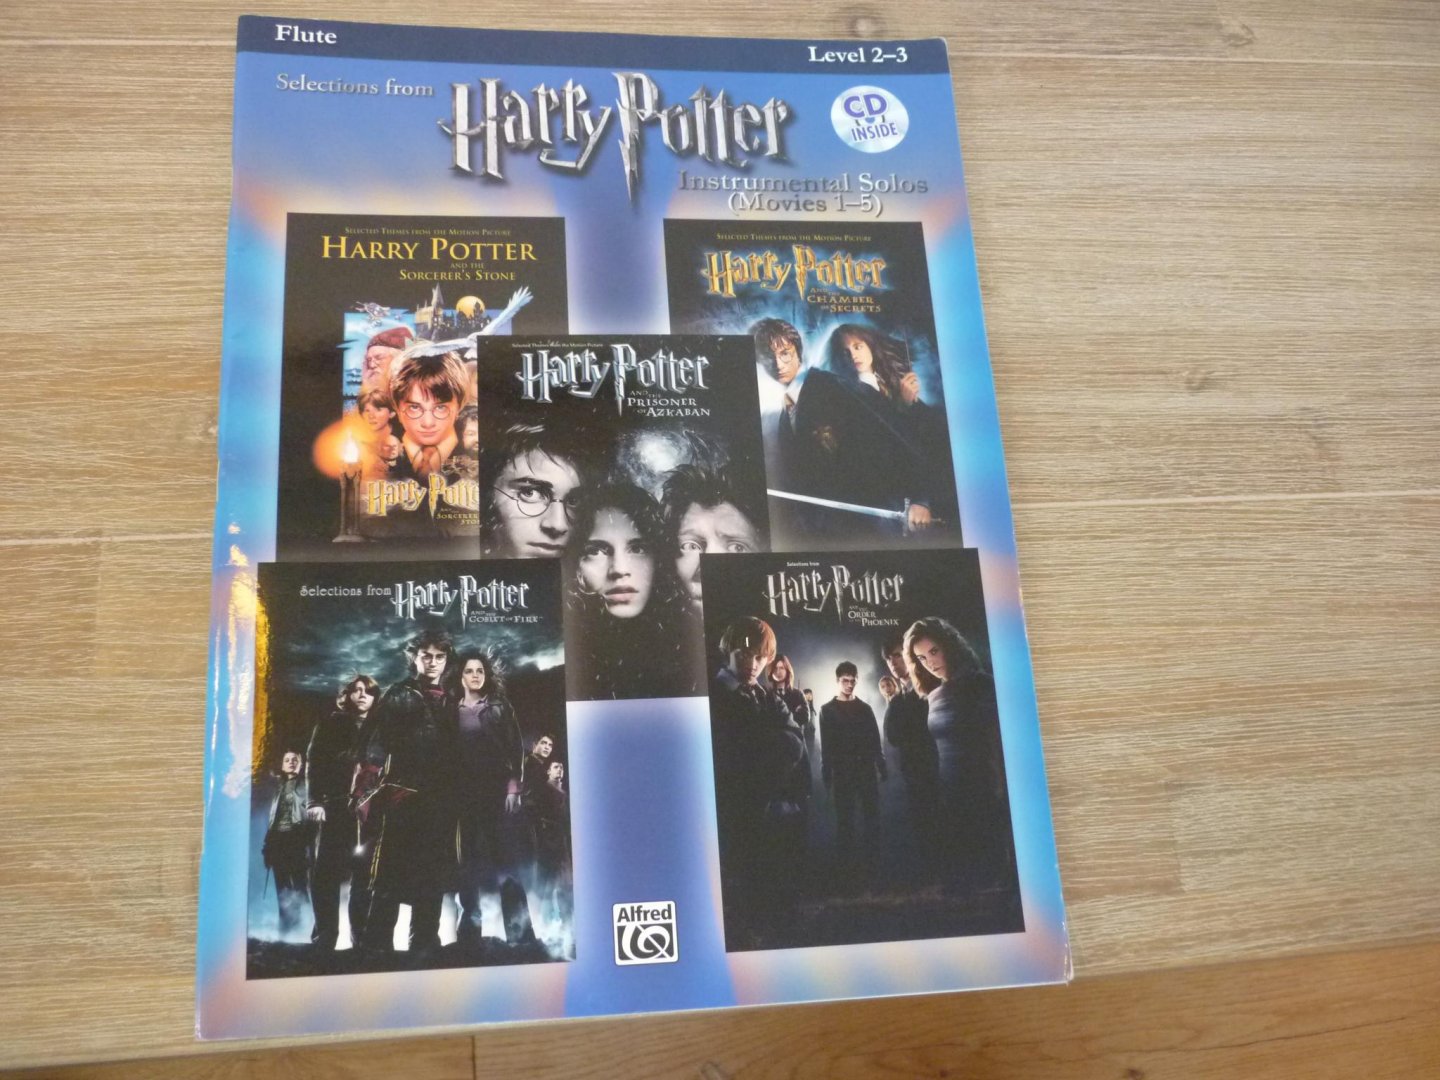 Div. Componisten - Selections from Harry Potter (Movies 1-5) Instrumental Solos - Playalong-CD Included for Violin and Piano; voor Viool, piano / Muziekboek, playback-CD